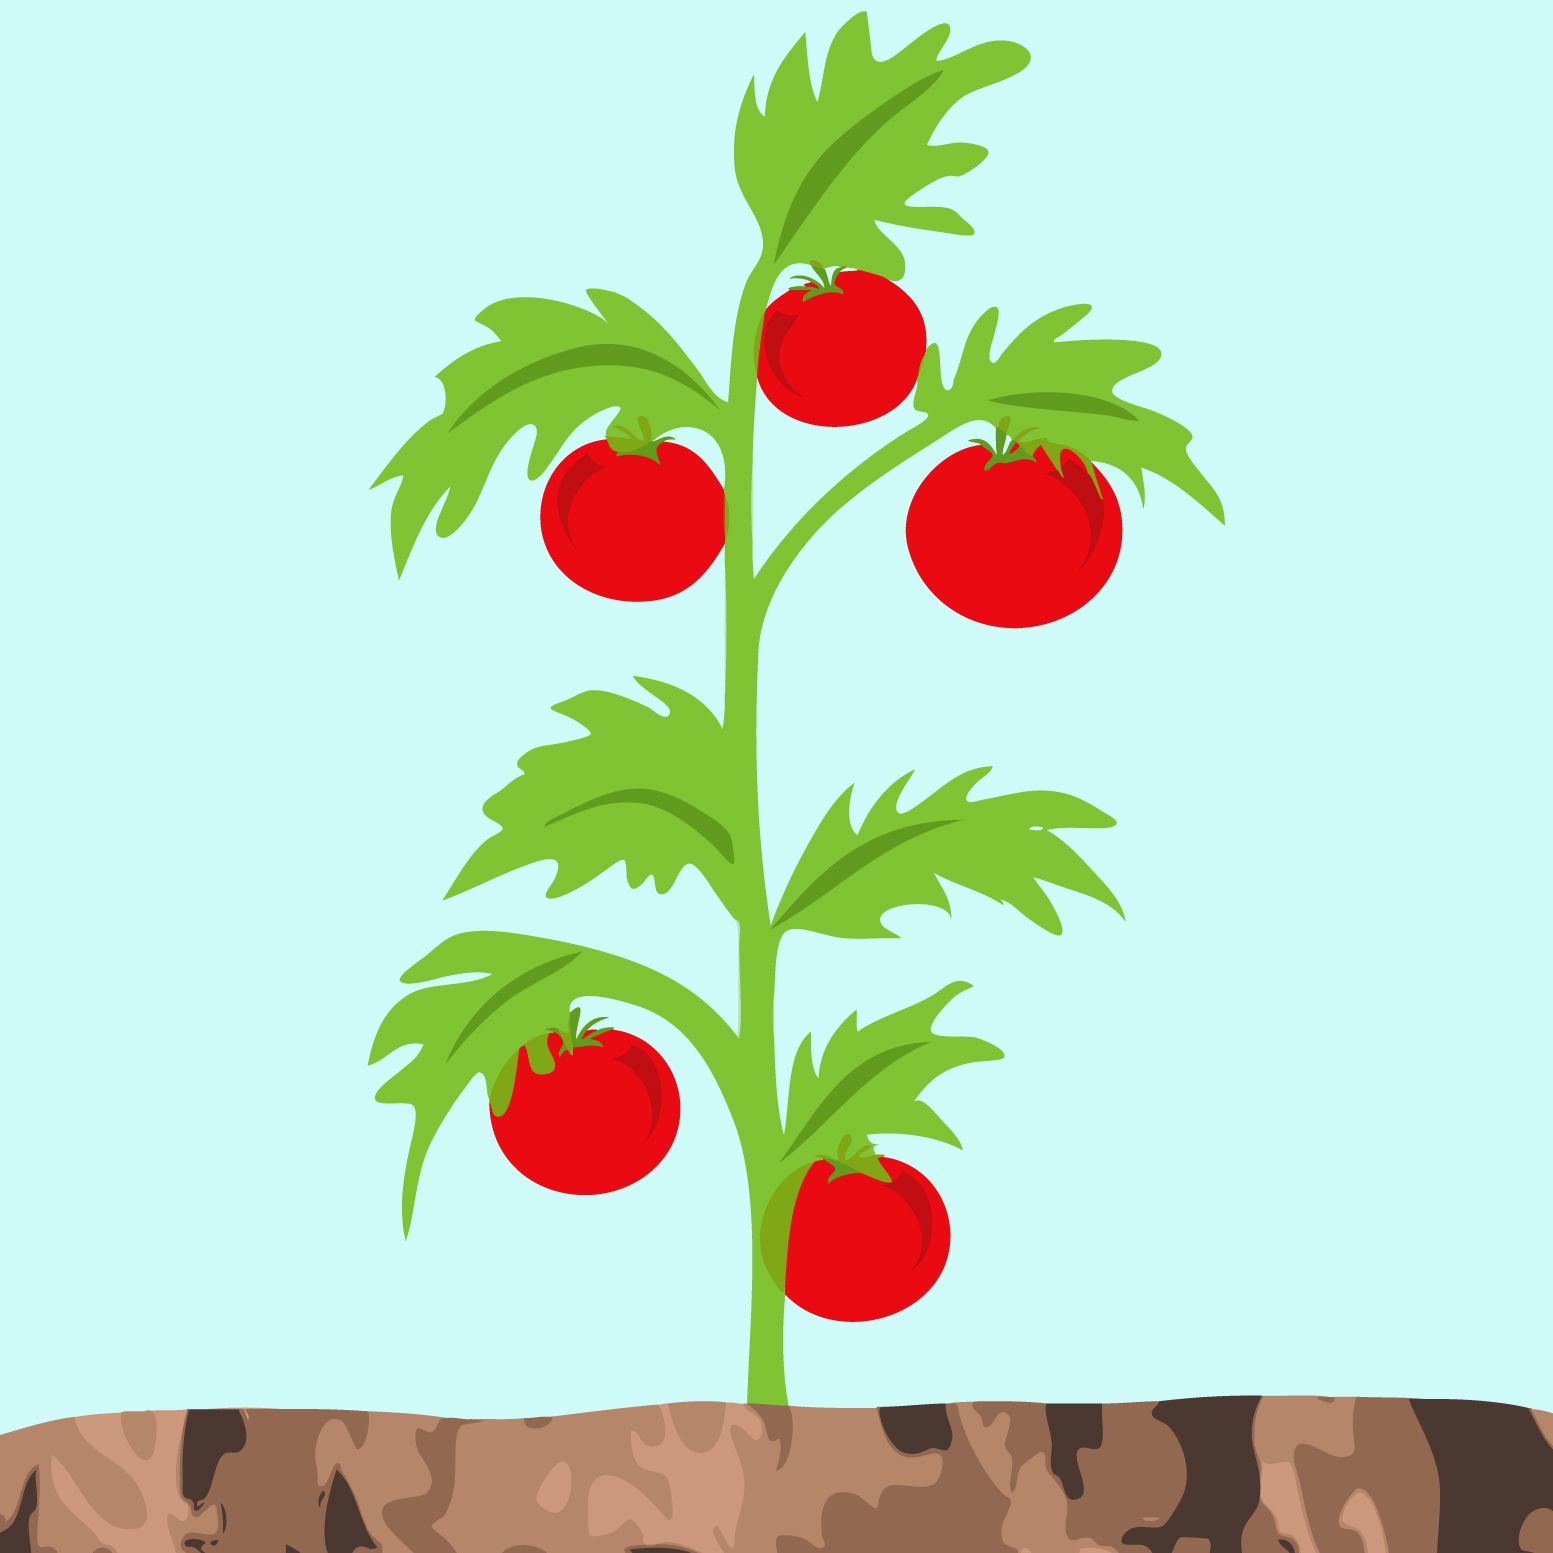 Plants clipart fruit plant. Image result for tomato